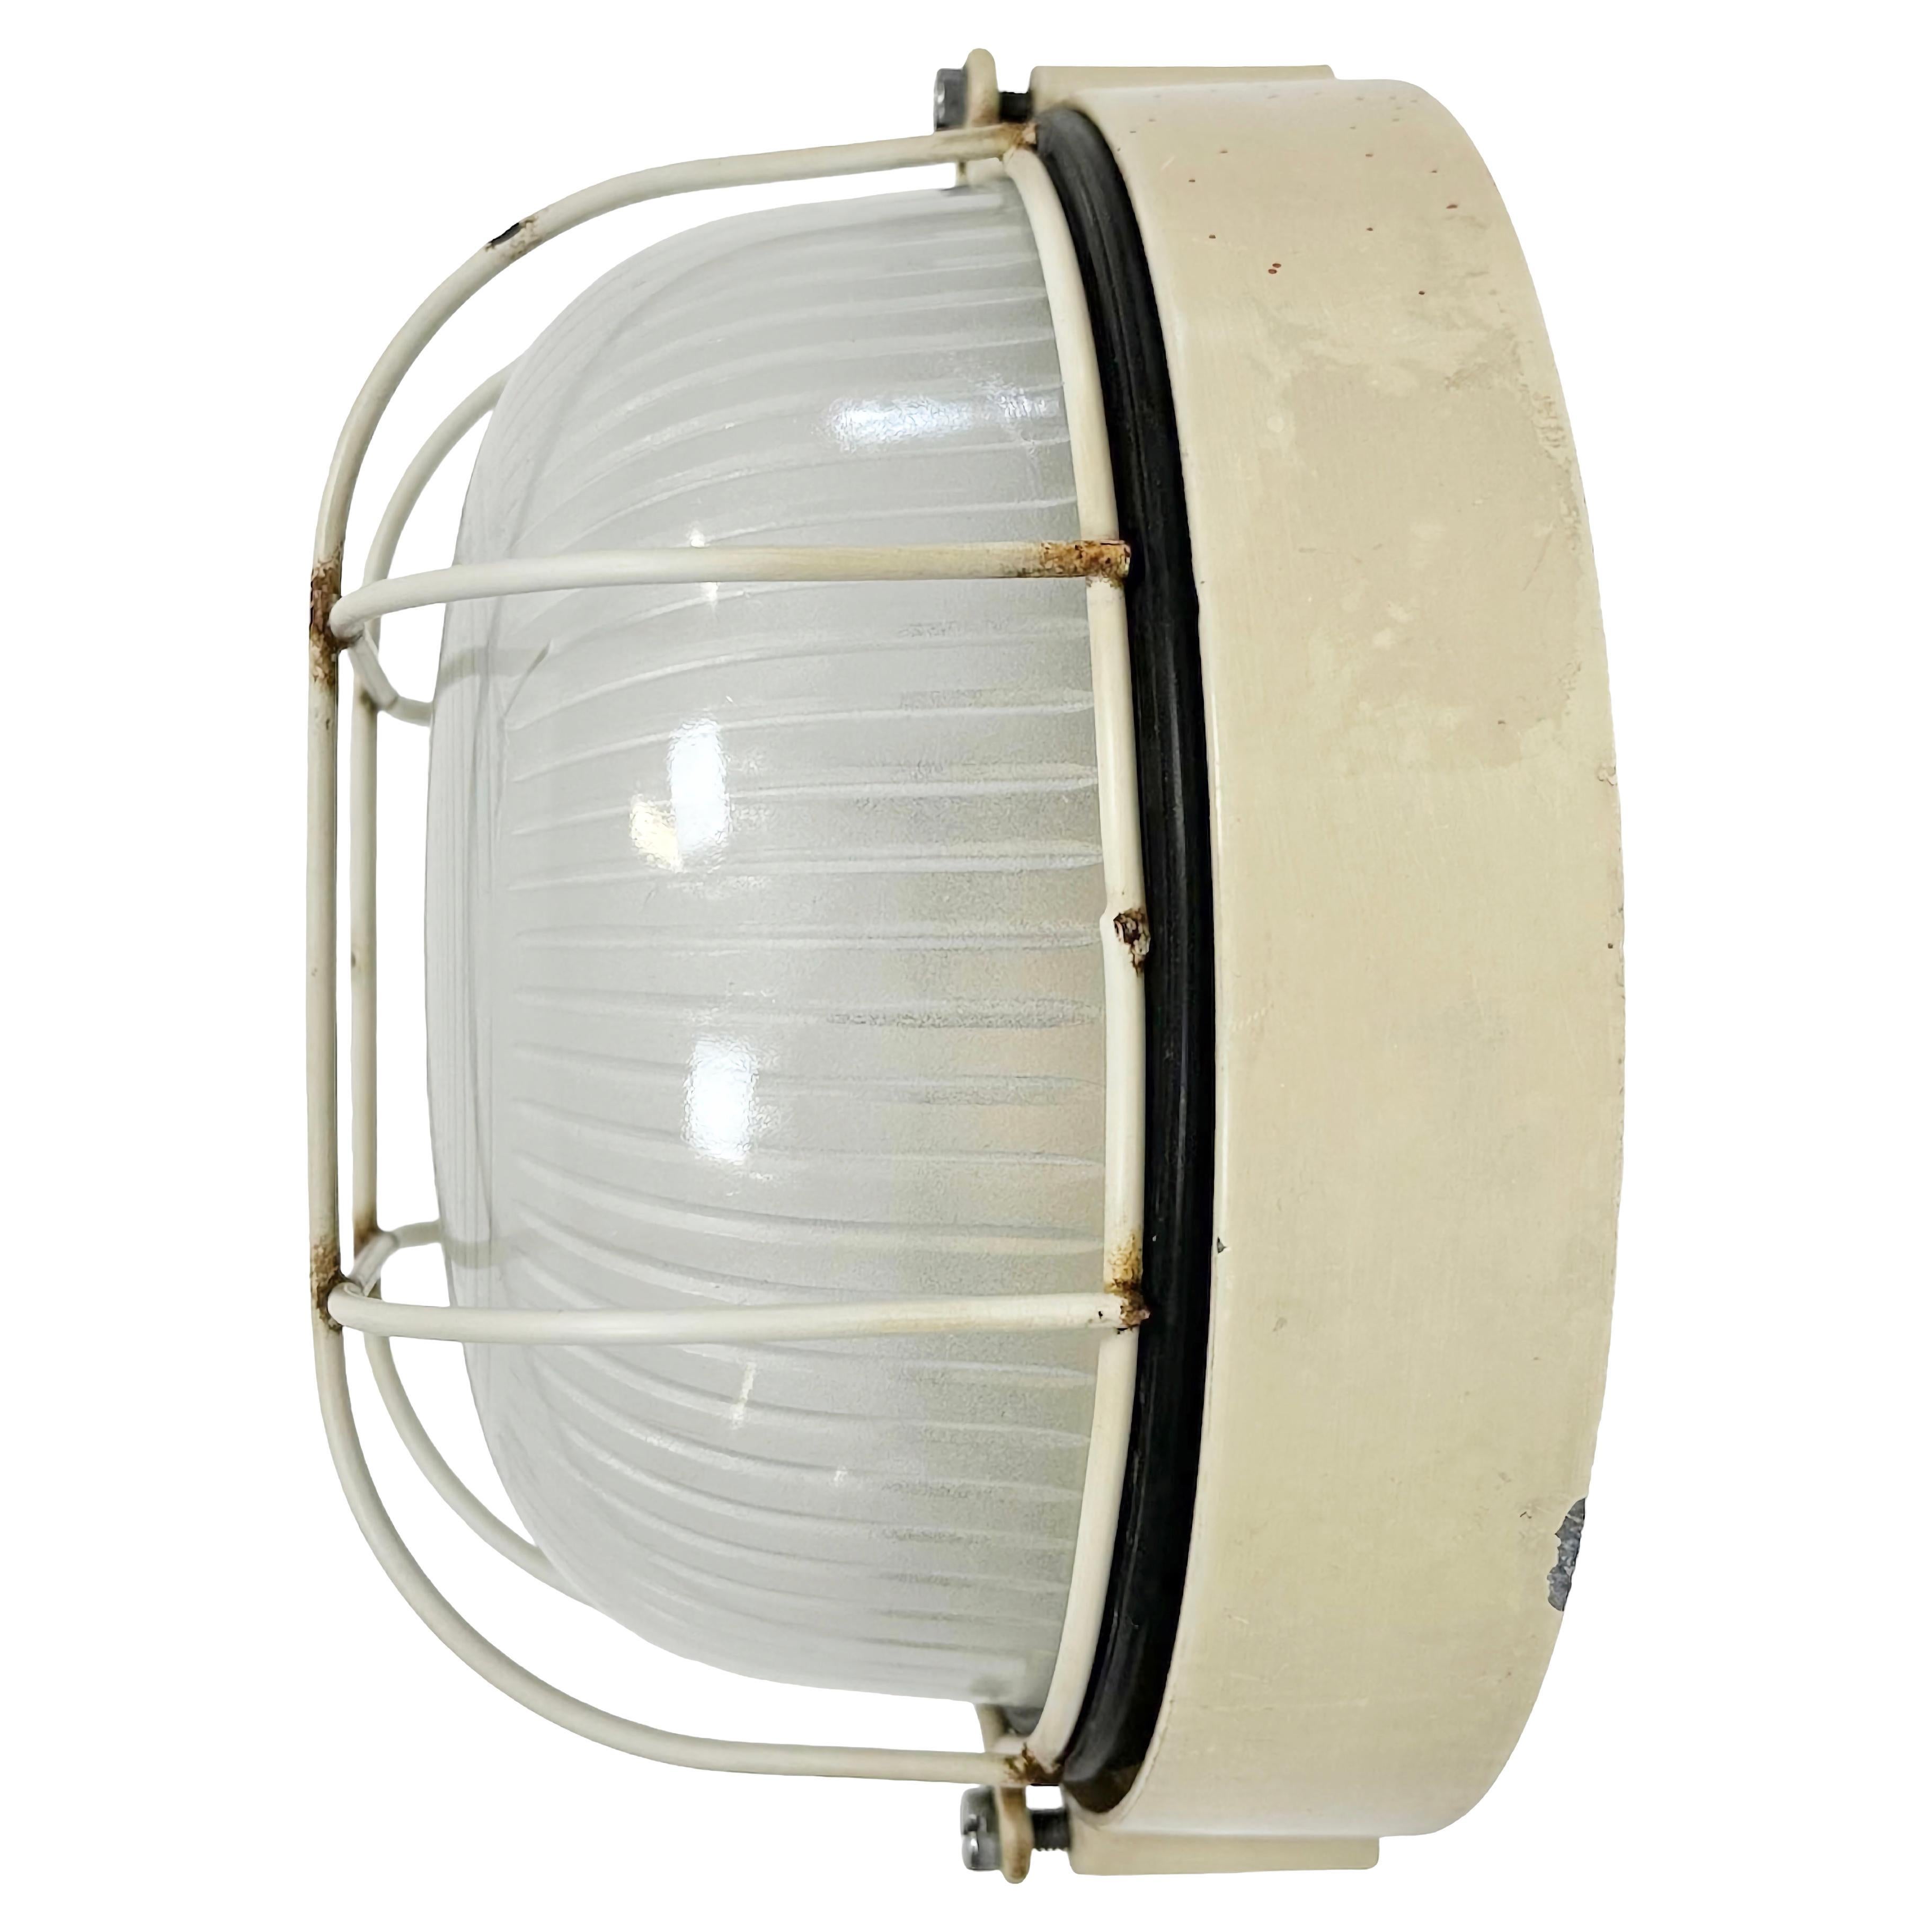 Vintage industrial iron wall lamp made in Italy during the 1970s. It features an iron body, milky stripeds curved glass cover and iron protective grid. The porcelain socket requires E 27/ E26 light bulbs. It can be also used as a ceiling lamp.